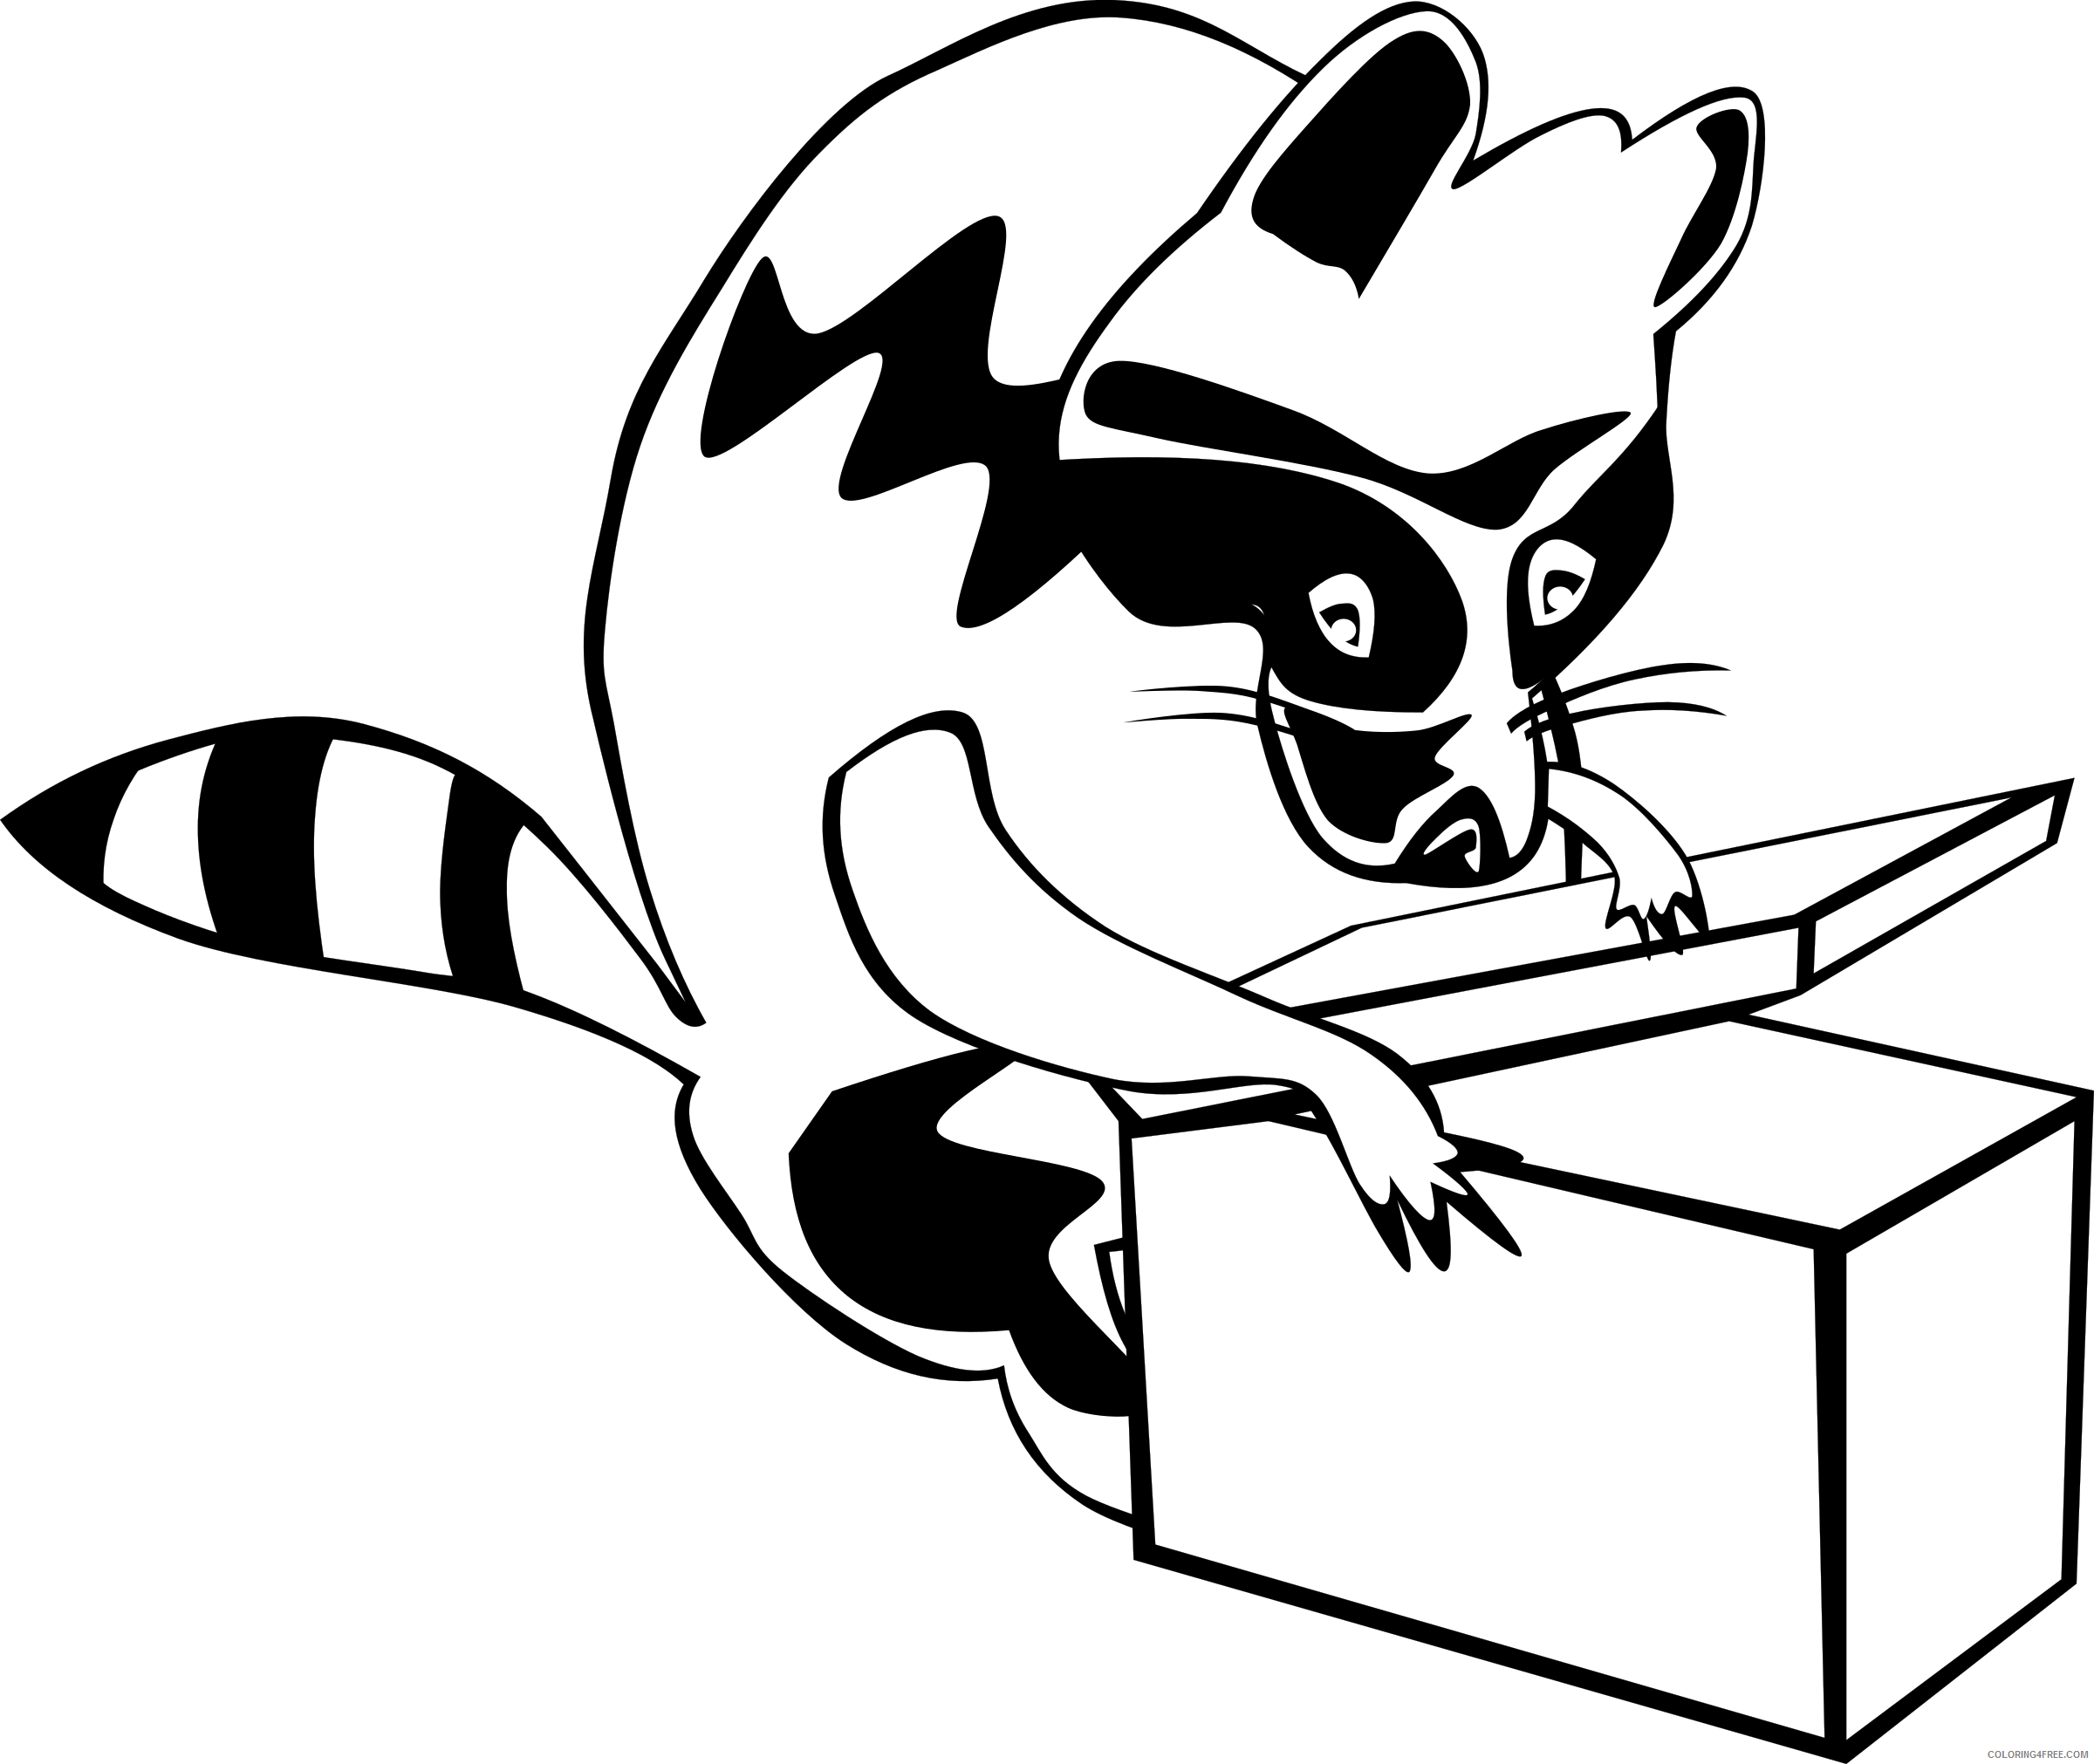 Raccoon Coloring Pages gerald g raccoon opening box Printable Coloring4free